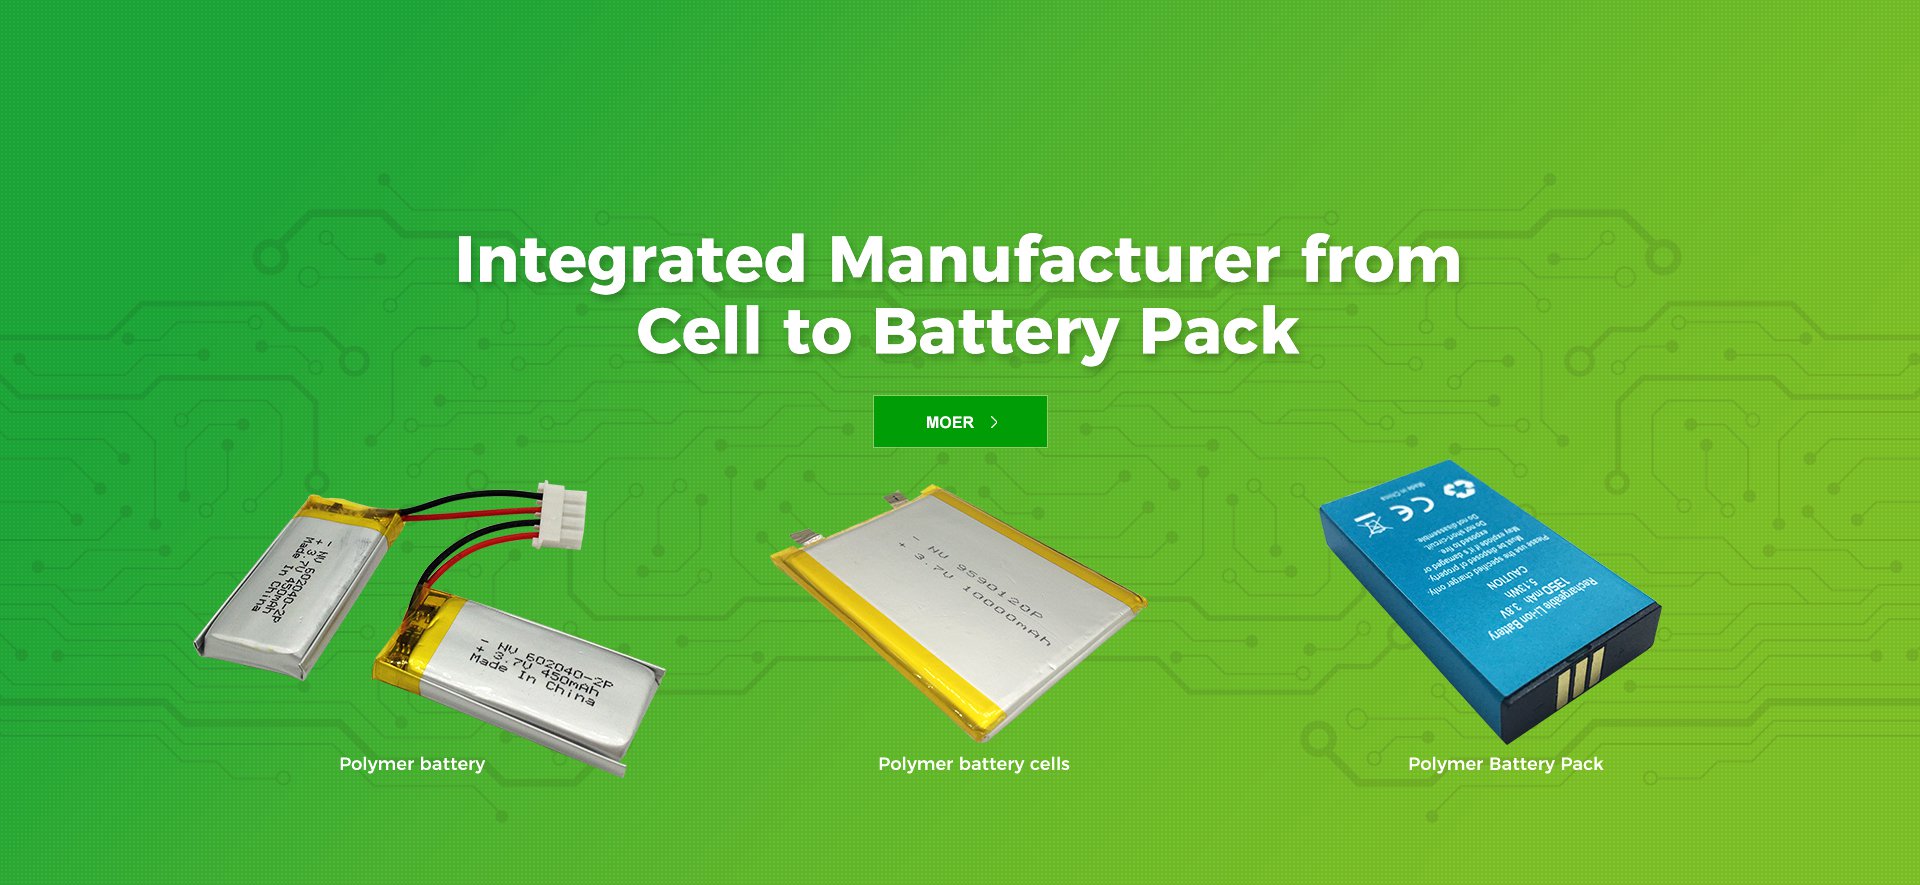 Integrated Manufacturer from Cell to Battery Pack